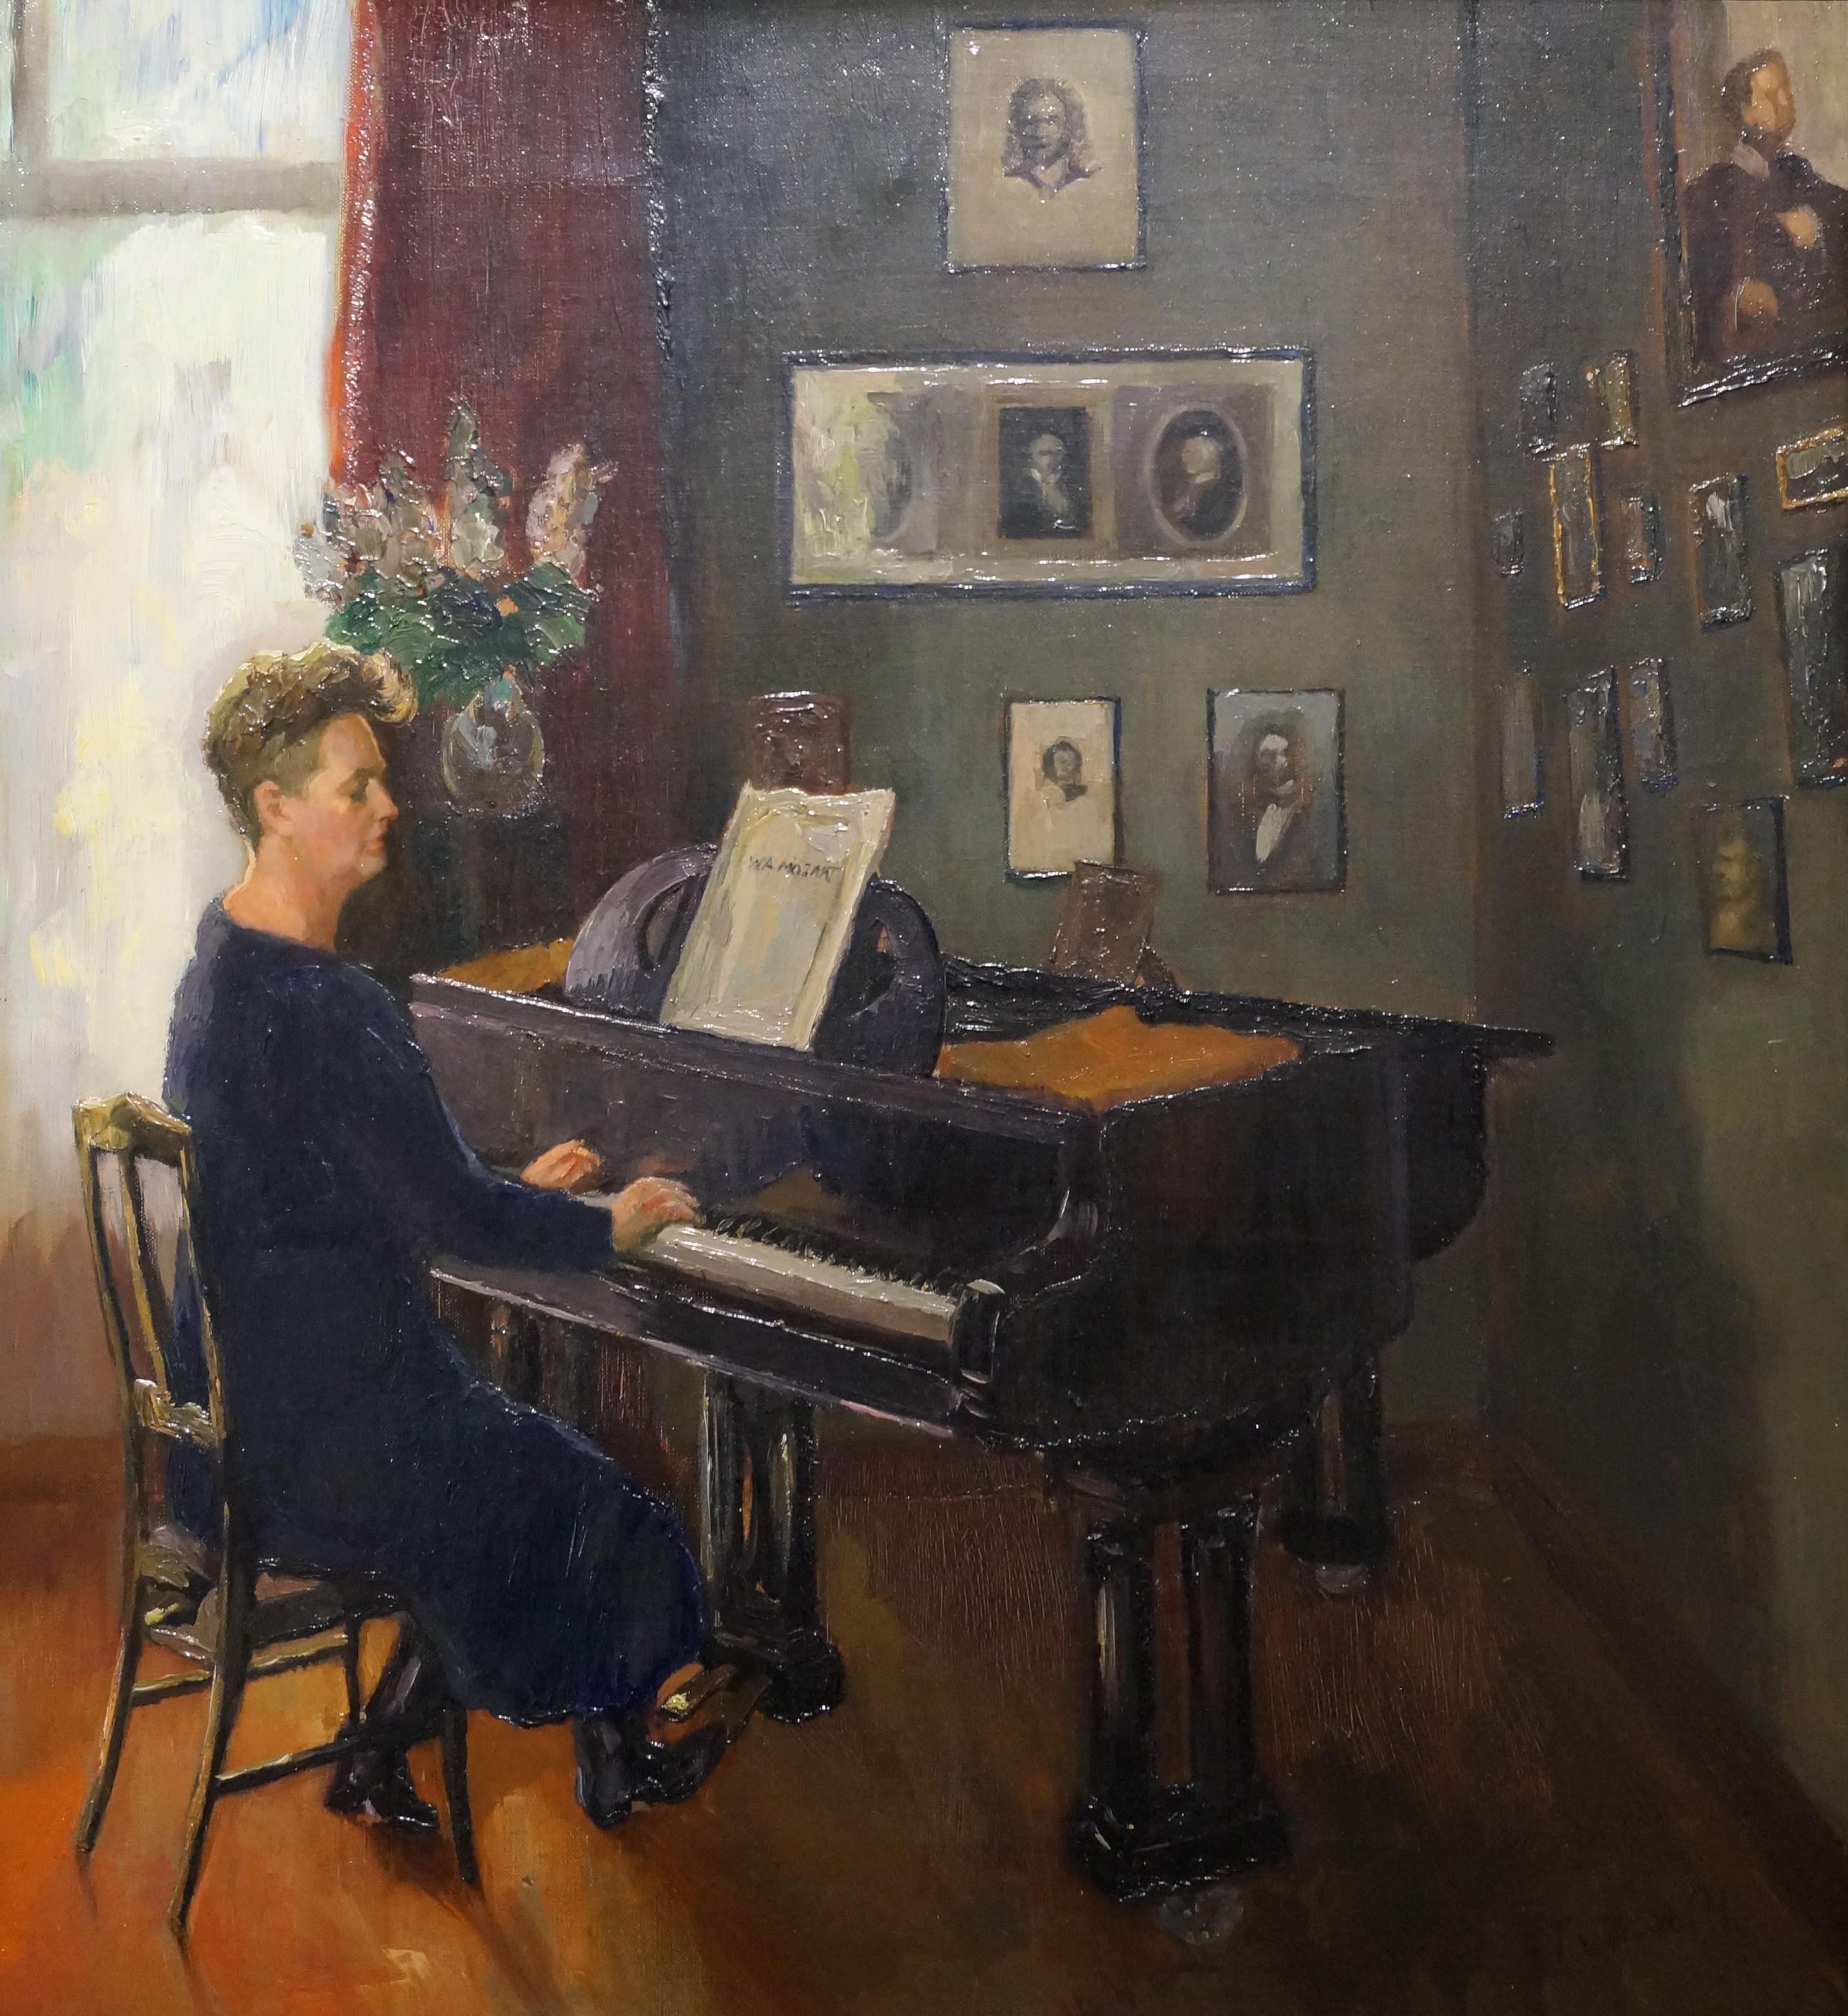 Unknown Interior Painting - Decorative antique oil painting on canvas, interior with lady playing the piano